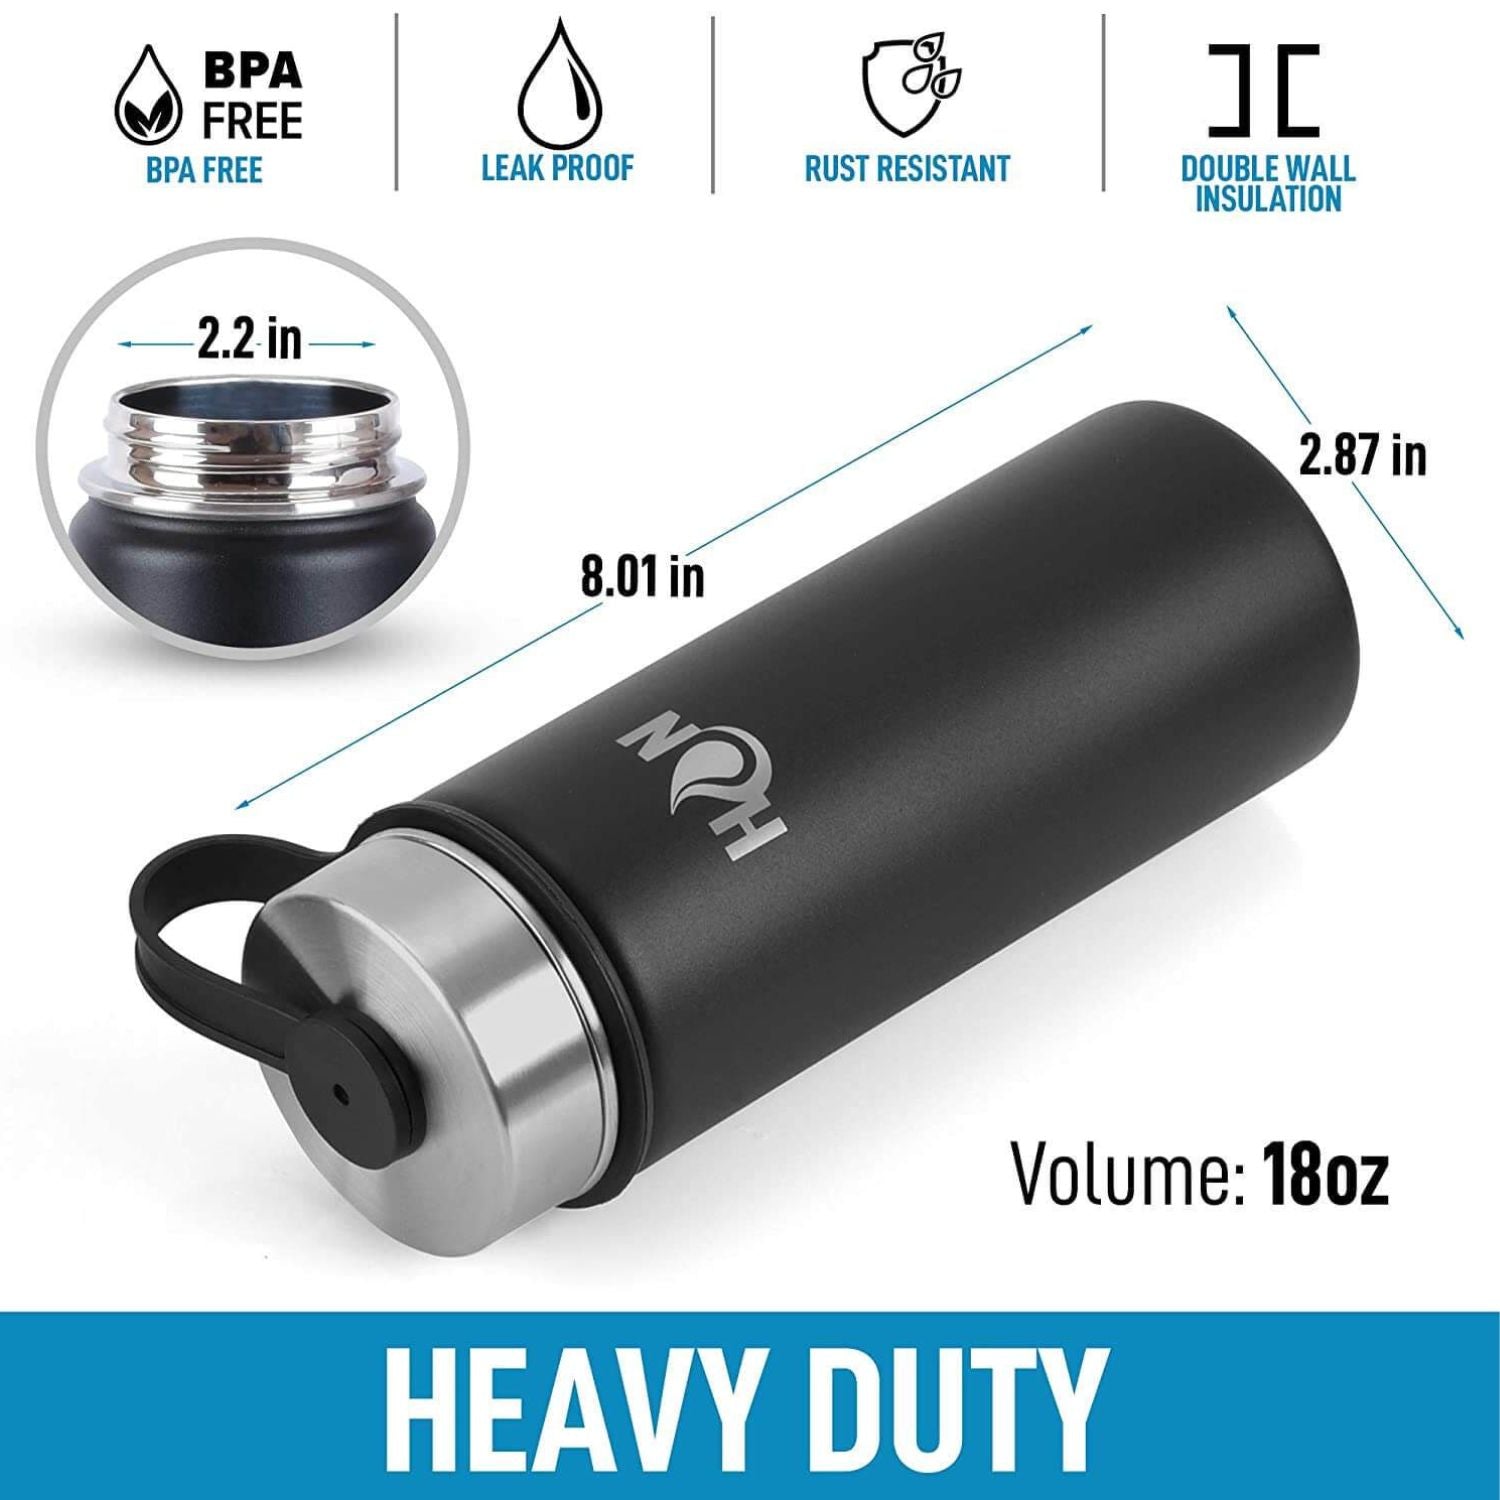 Heavy duty Hydration Nation Thermo Insulated Water Bottle